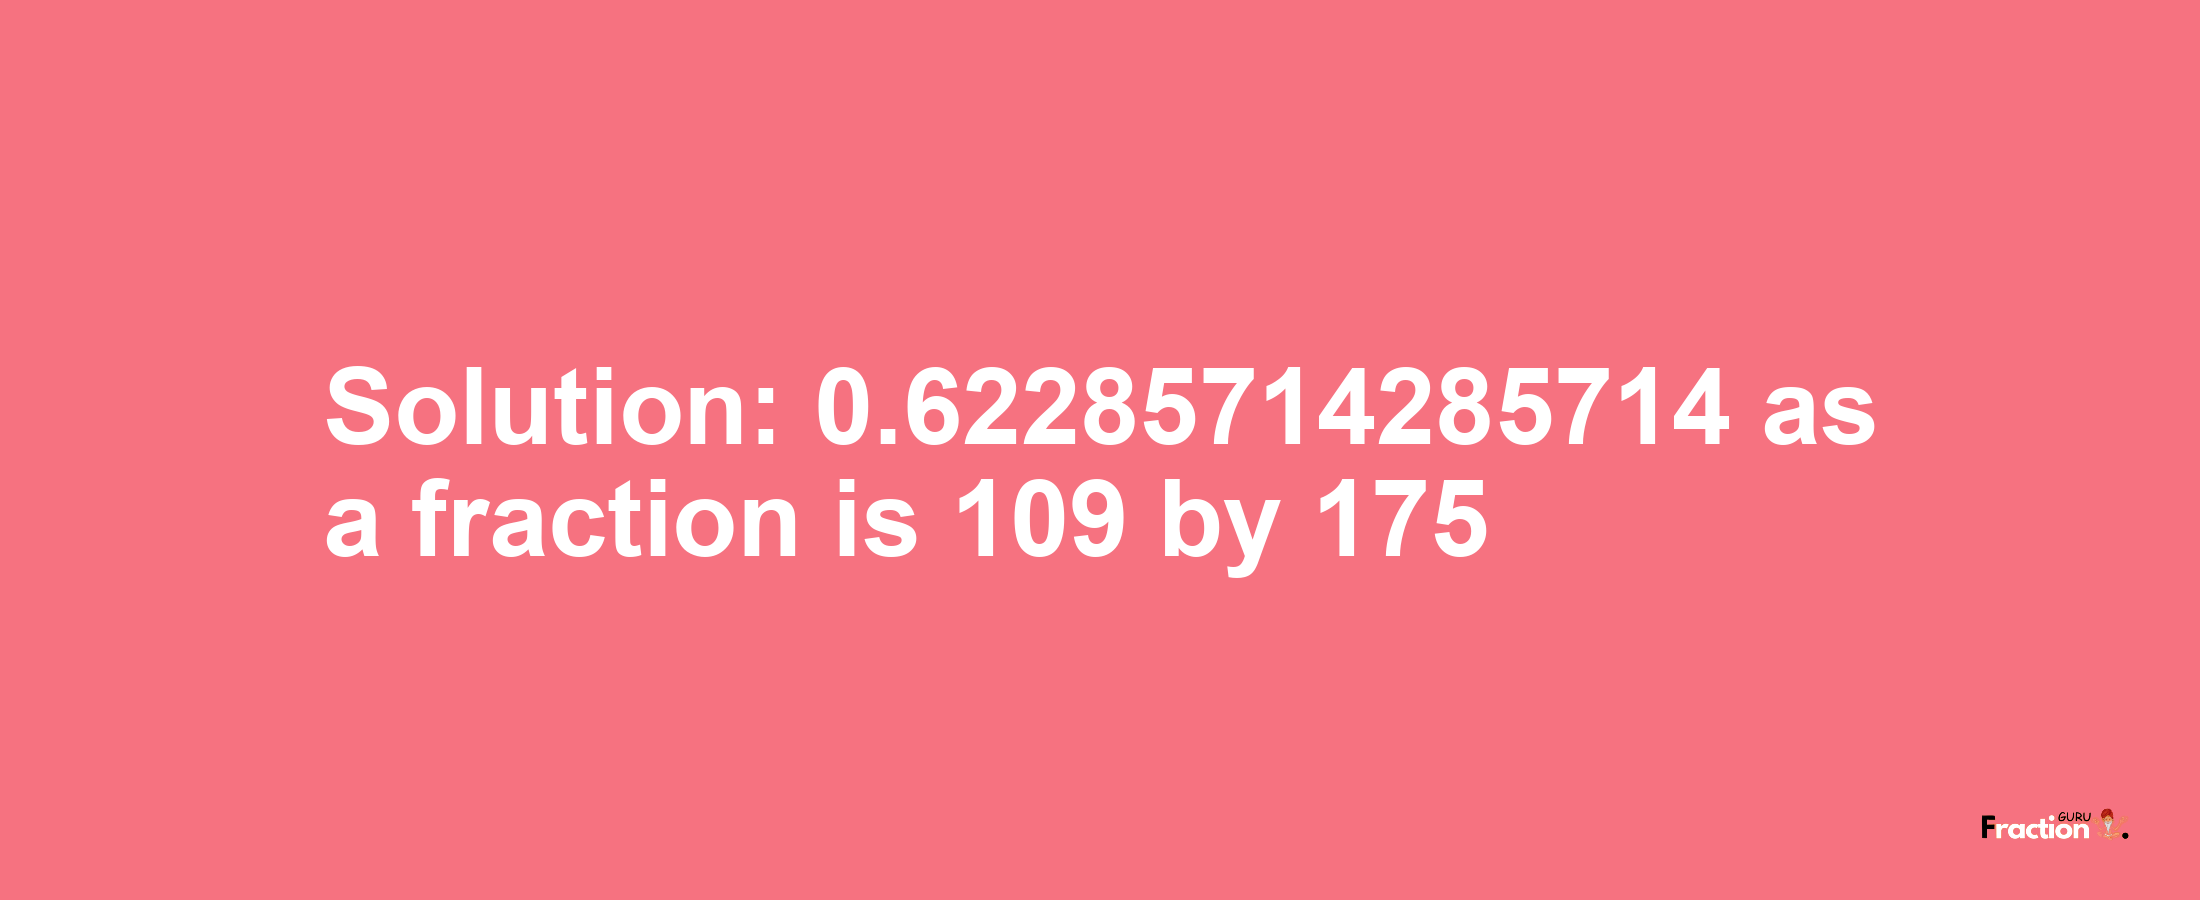 Solution:0.62285714285714 as a fraction is 109/175